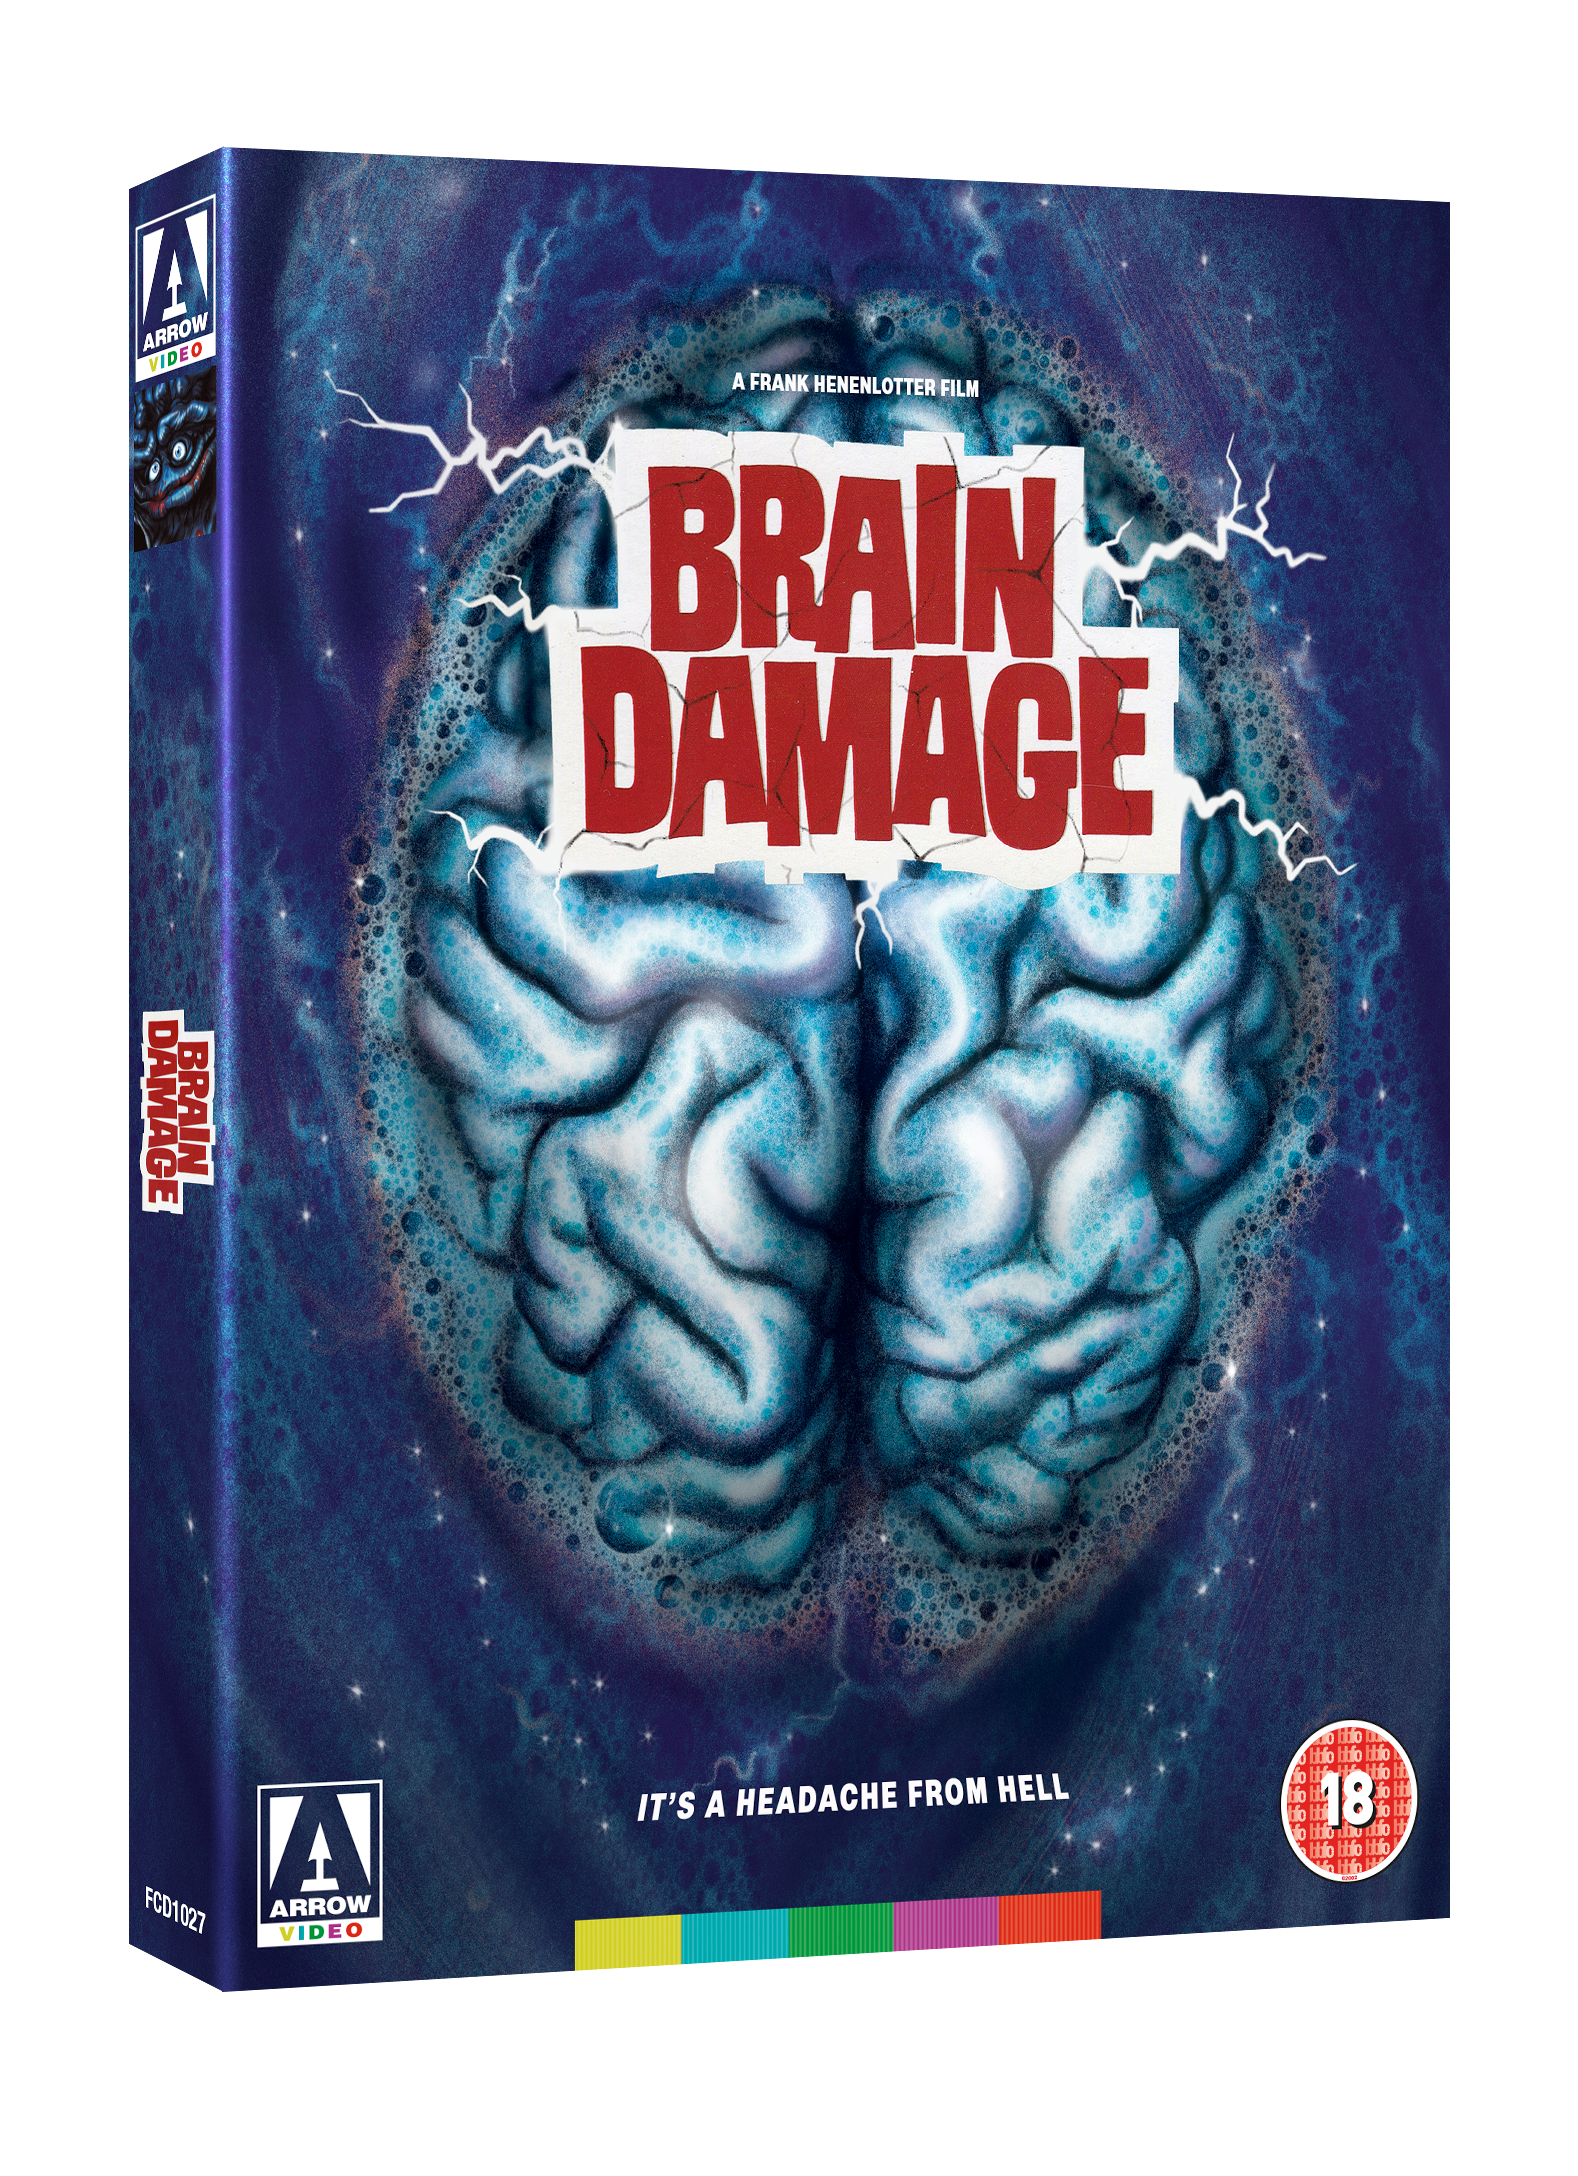 Brain Damage Blu-ray Review Frank Henenlotters Schlock Comedy Restored - Scifinow - The Worlds Best Science Fiction Fantasy And Horror Magazine